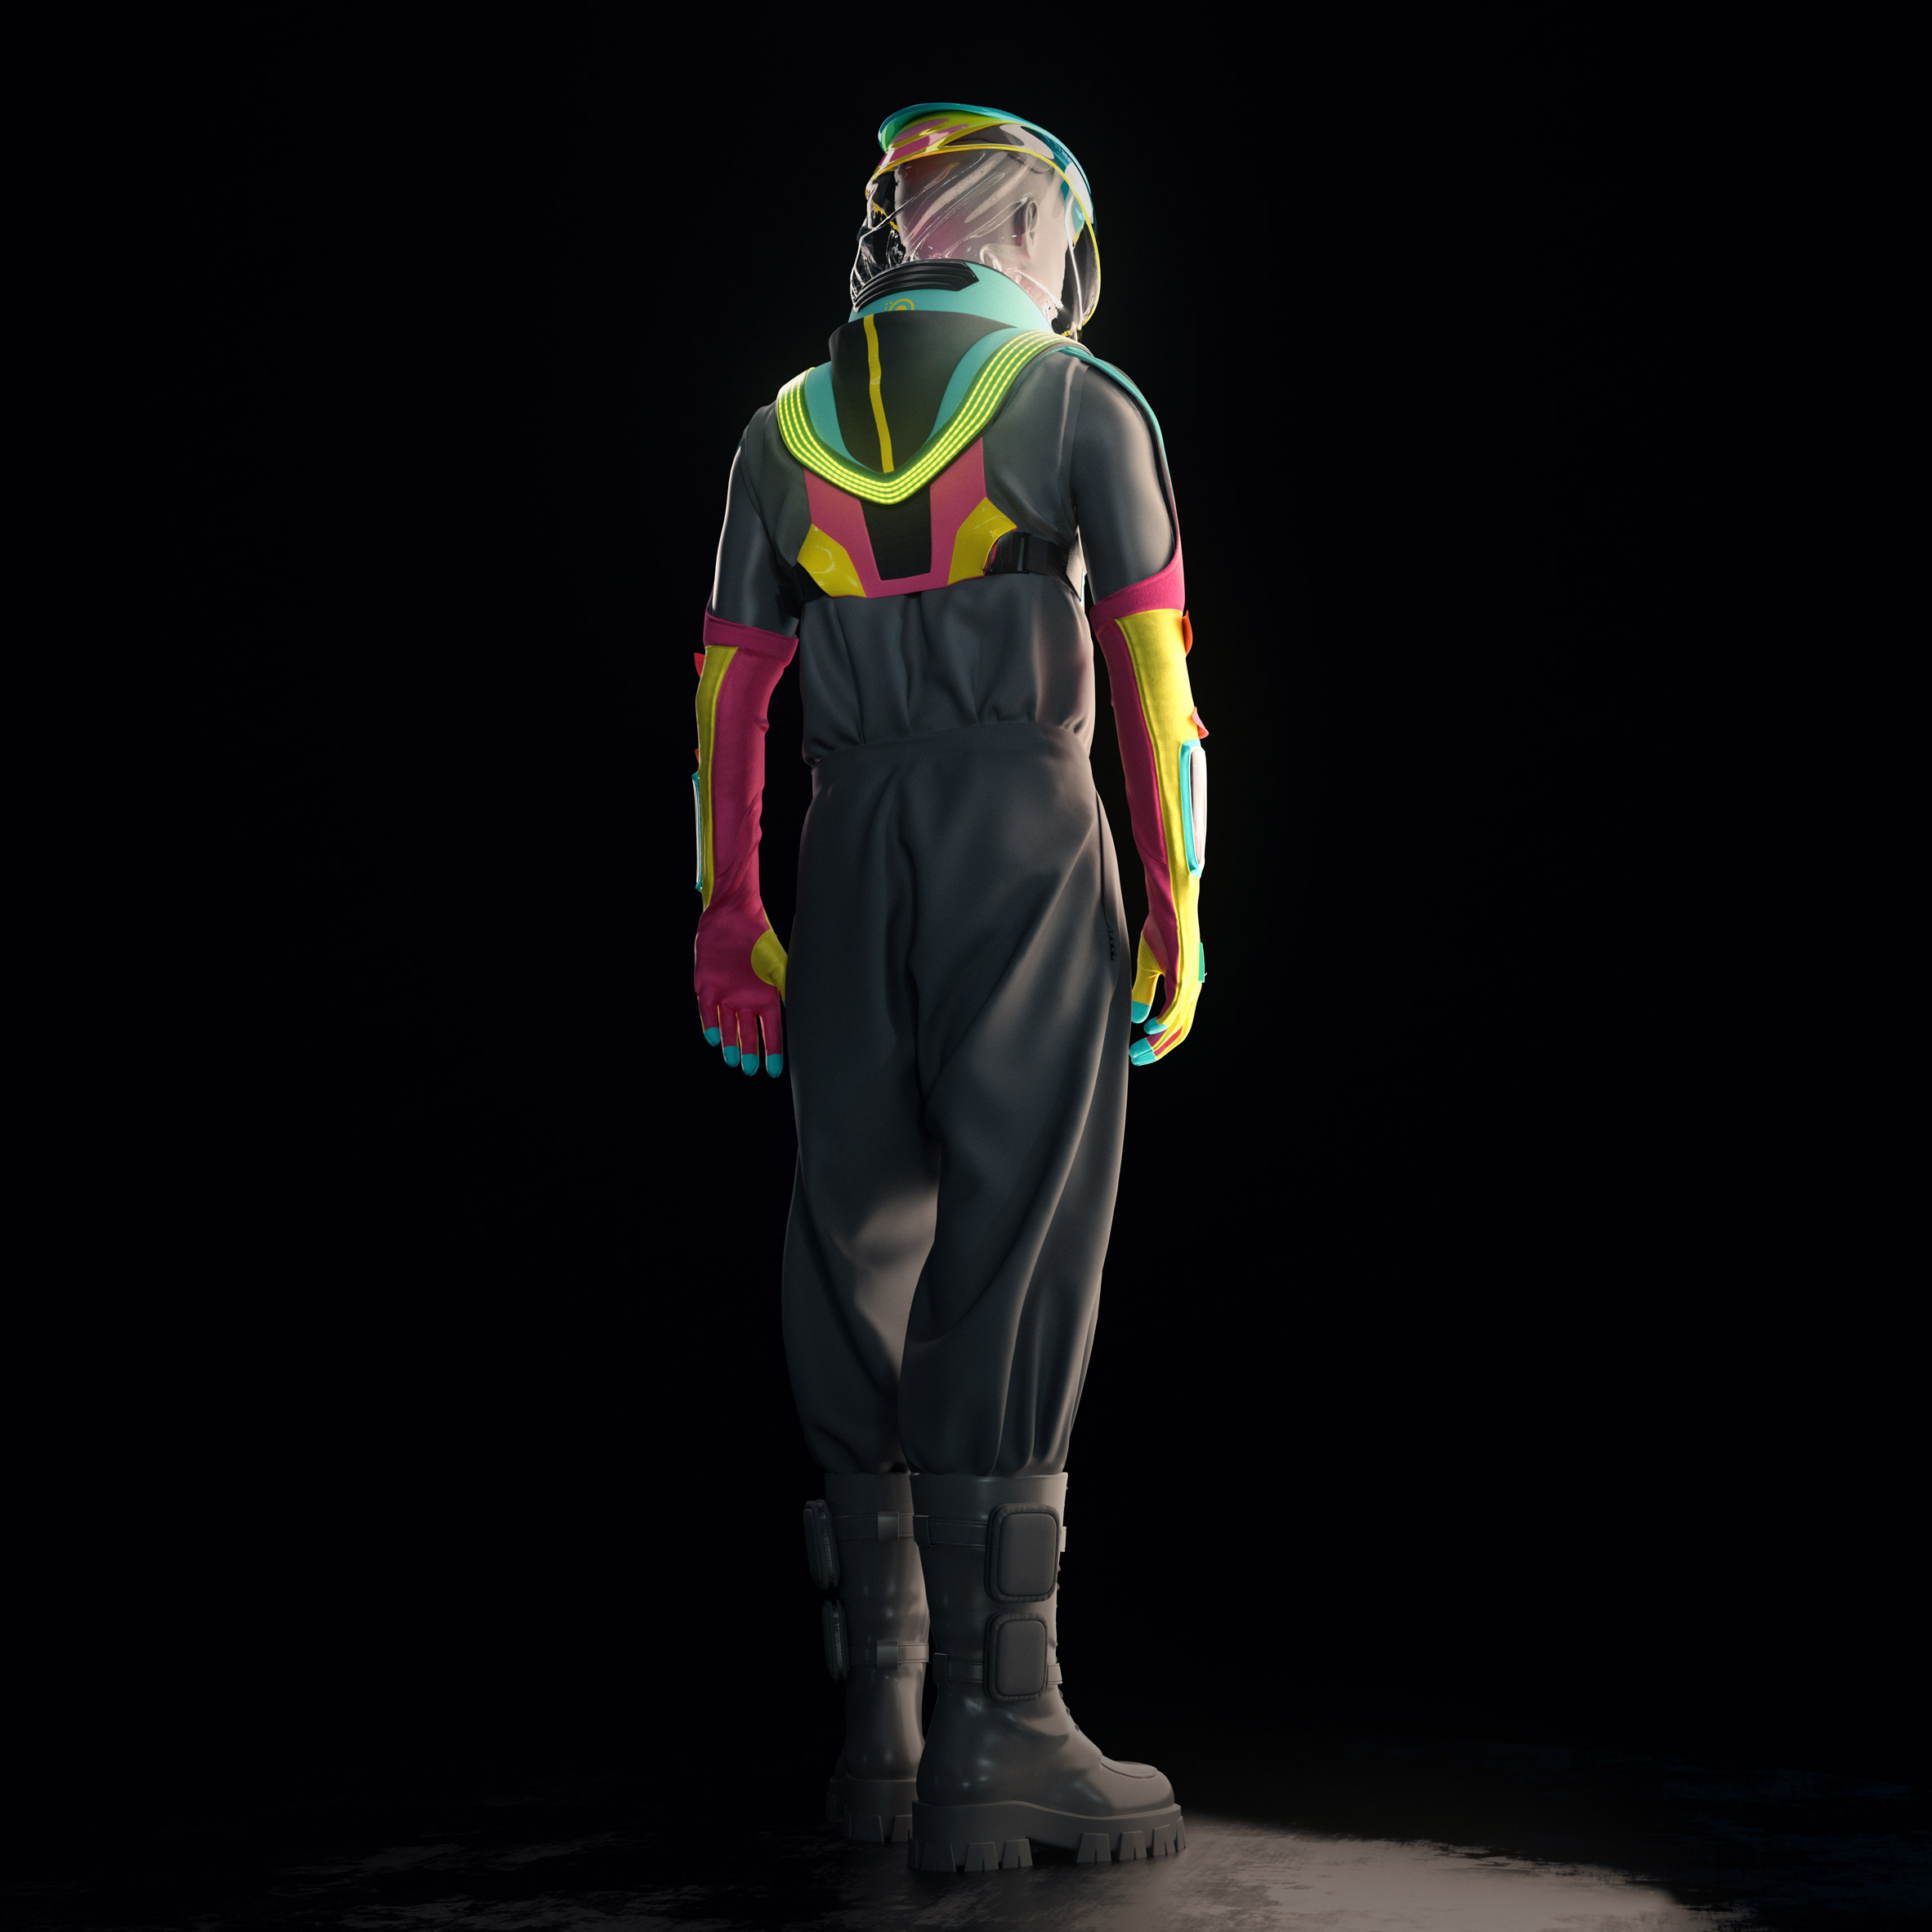 Production Club designs drink- and vape-friendly PPE suit for clubbing during a pandemic